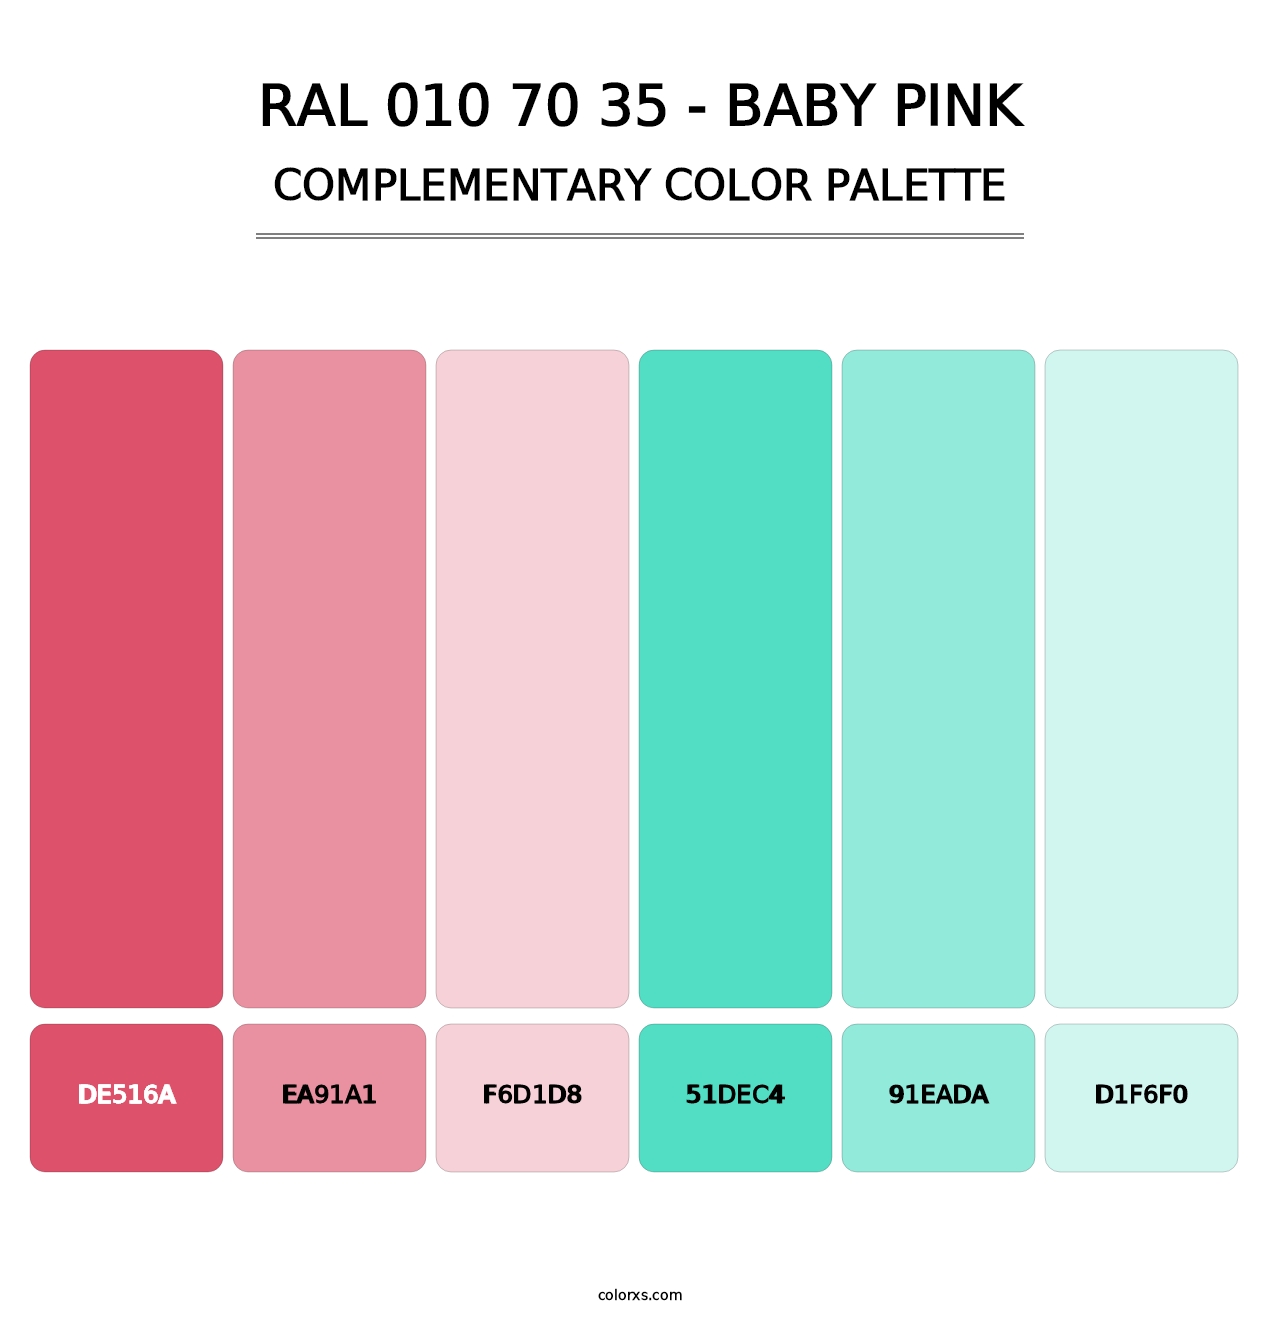 RAL 010 70 35 - Baby Pink - Complementary Color Palette